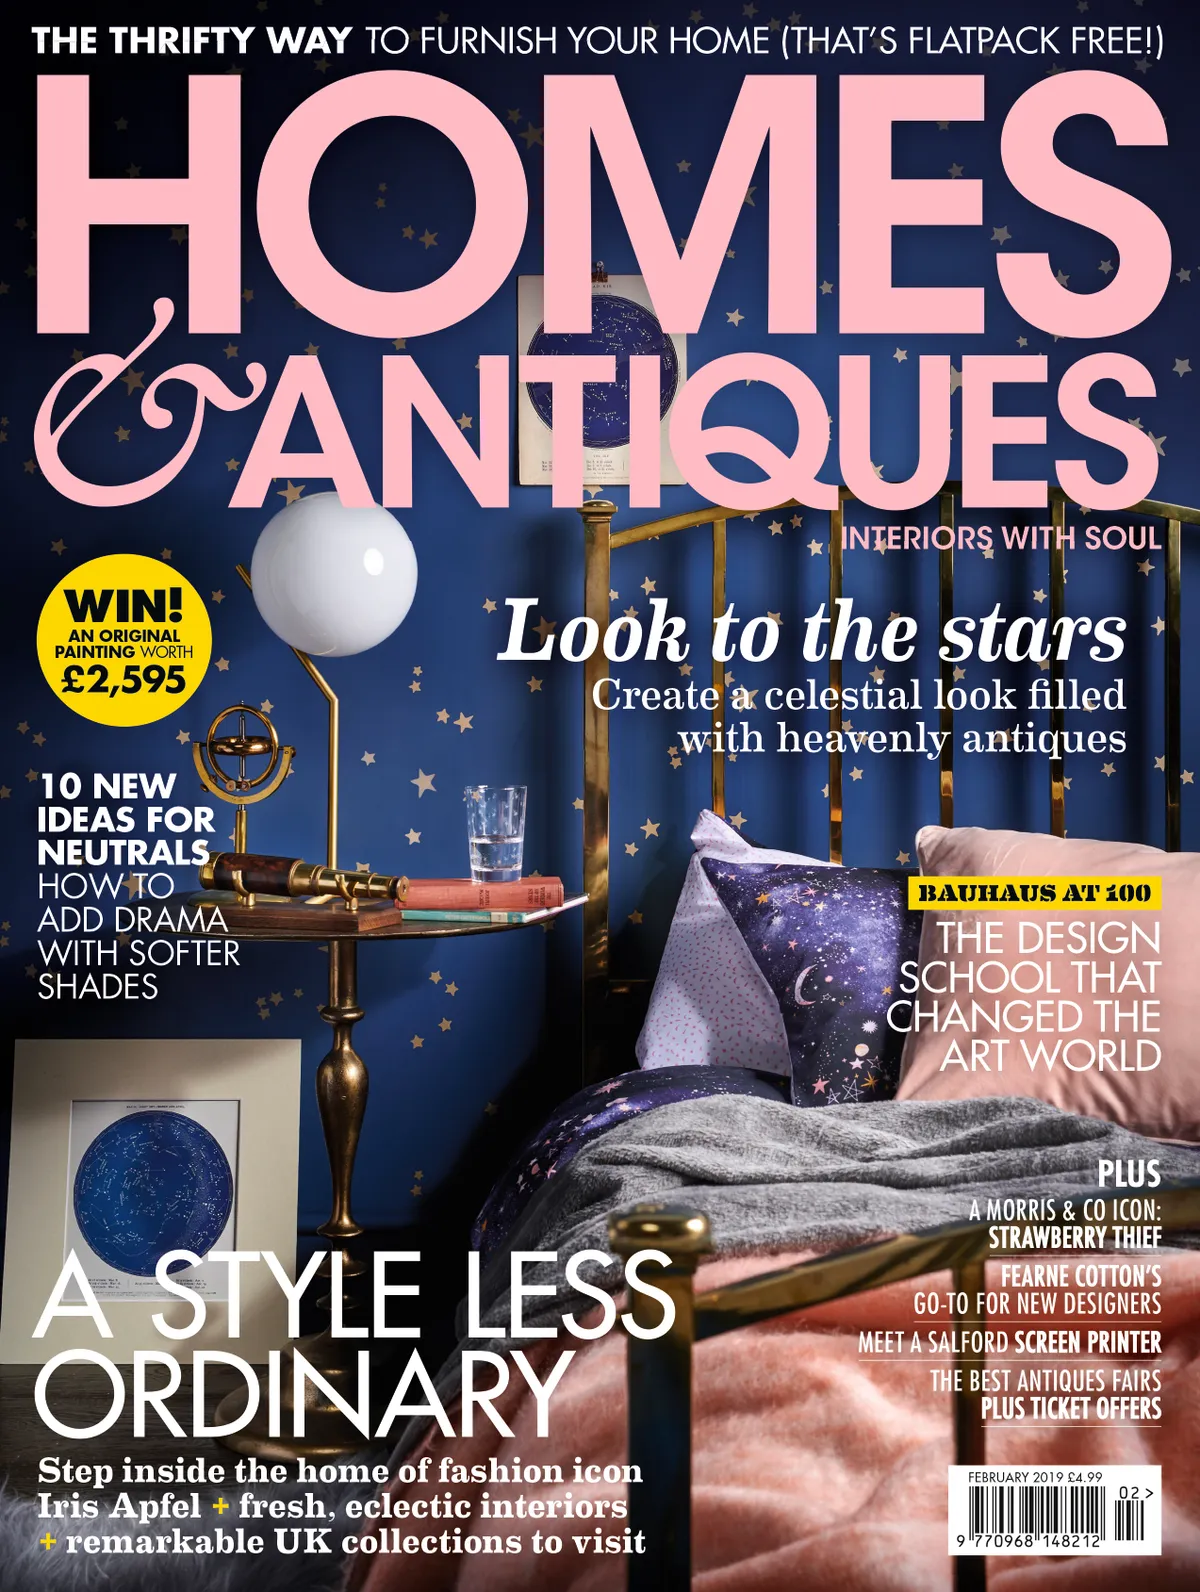 Homes & Antiques magazine February 2019 cover featuring a bedroom filled with celestial antiques and star/constellation inspired accessories